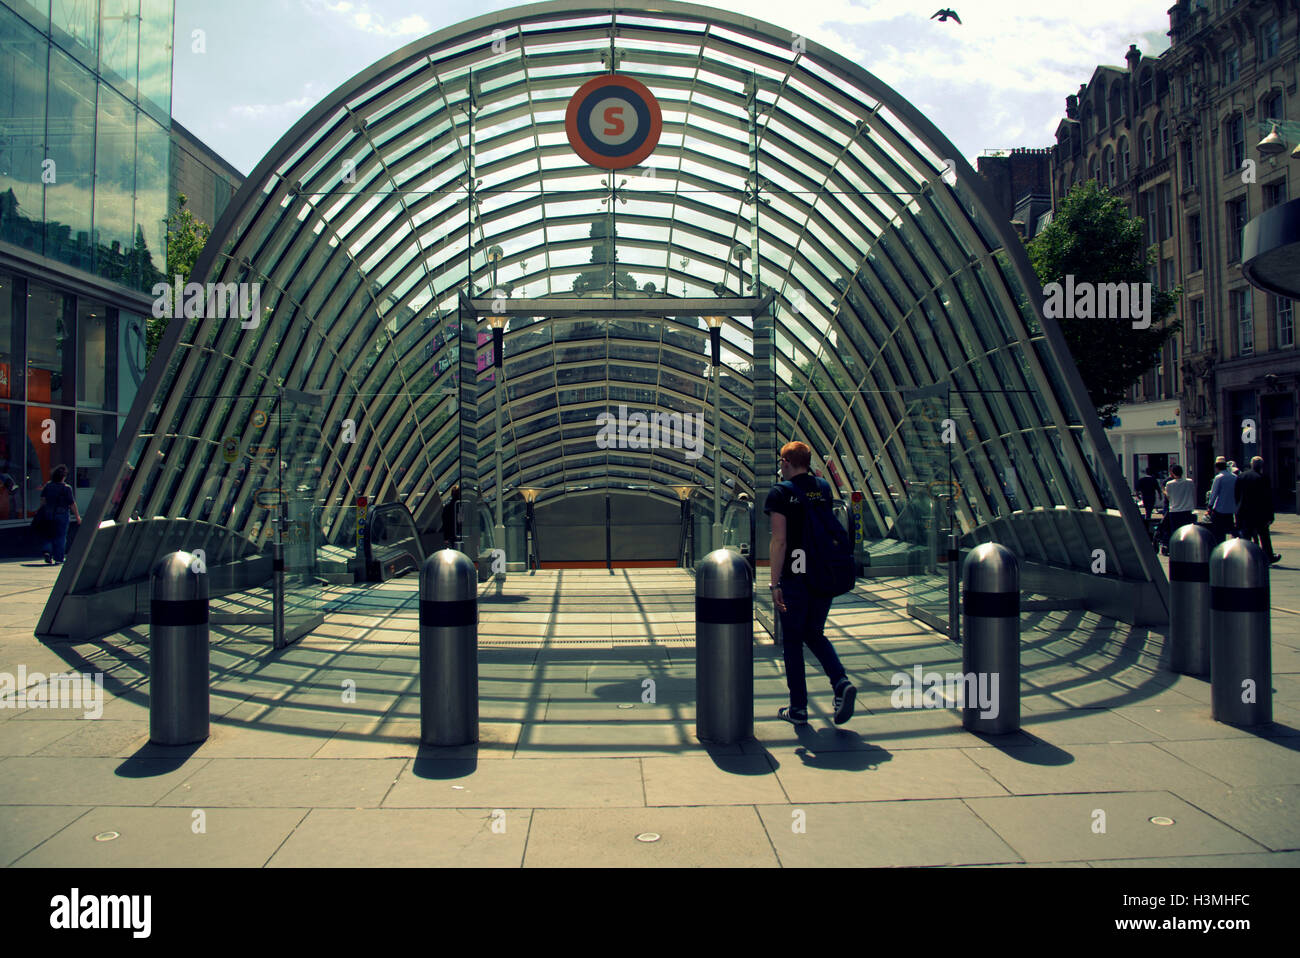 Glasgow underground or Subway entrance to st enoch station sunny Stock Photo